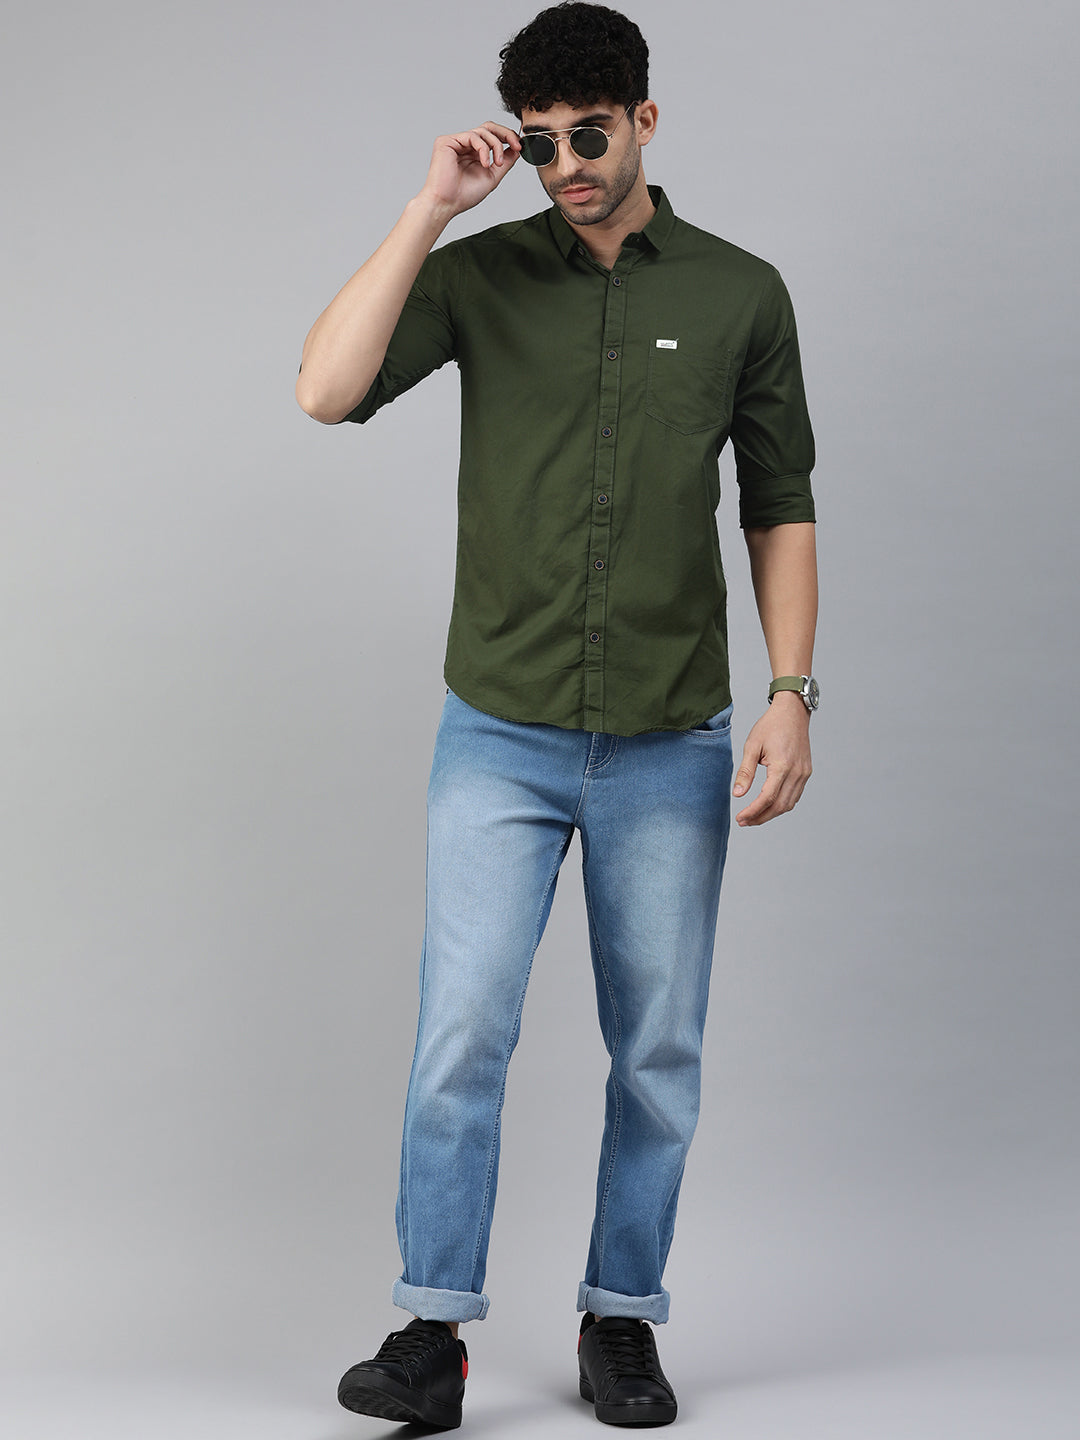 Majestic Man Comfort Slim Fit Solid Cotton Casual Shirt - Olive